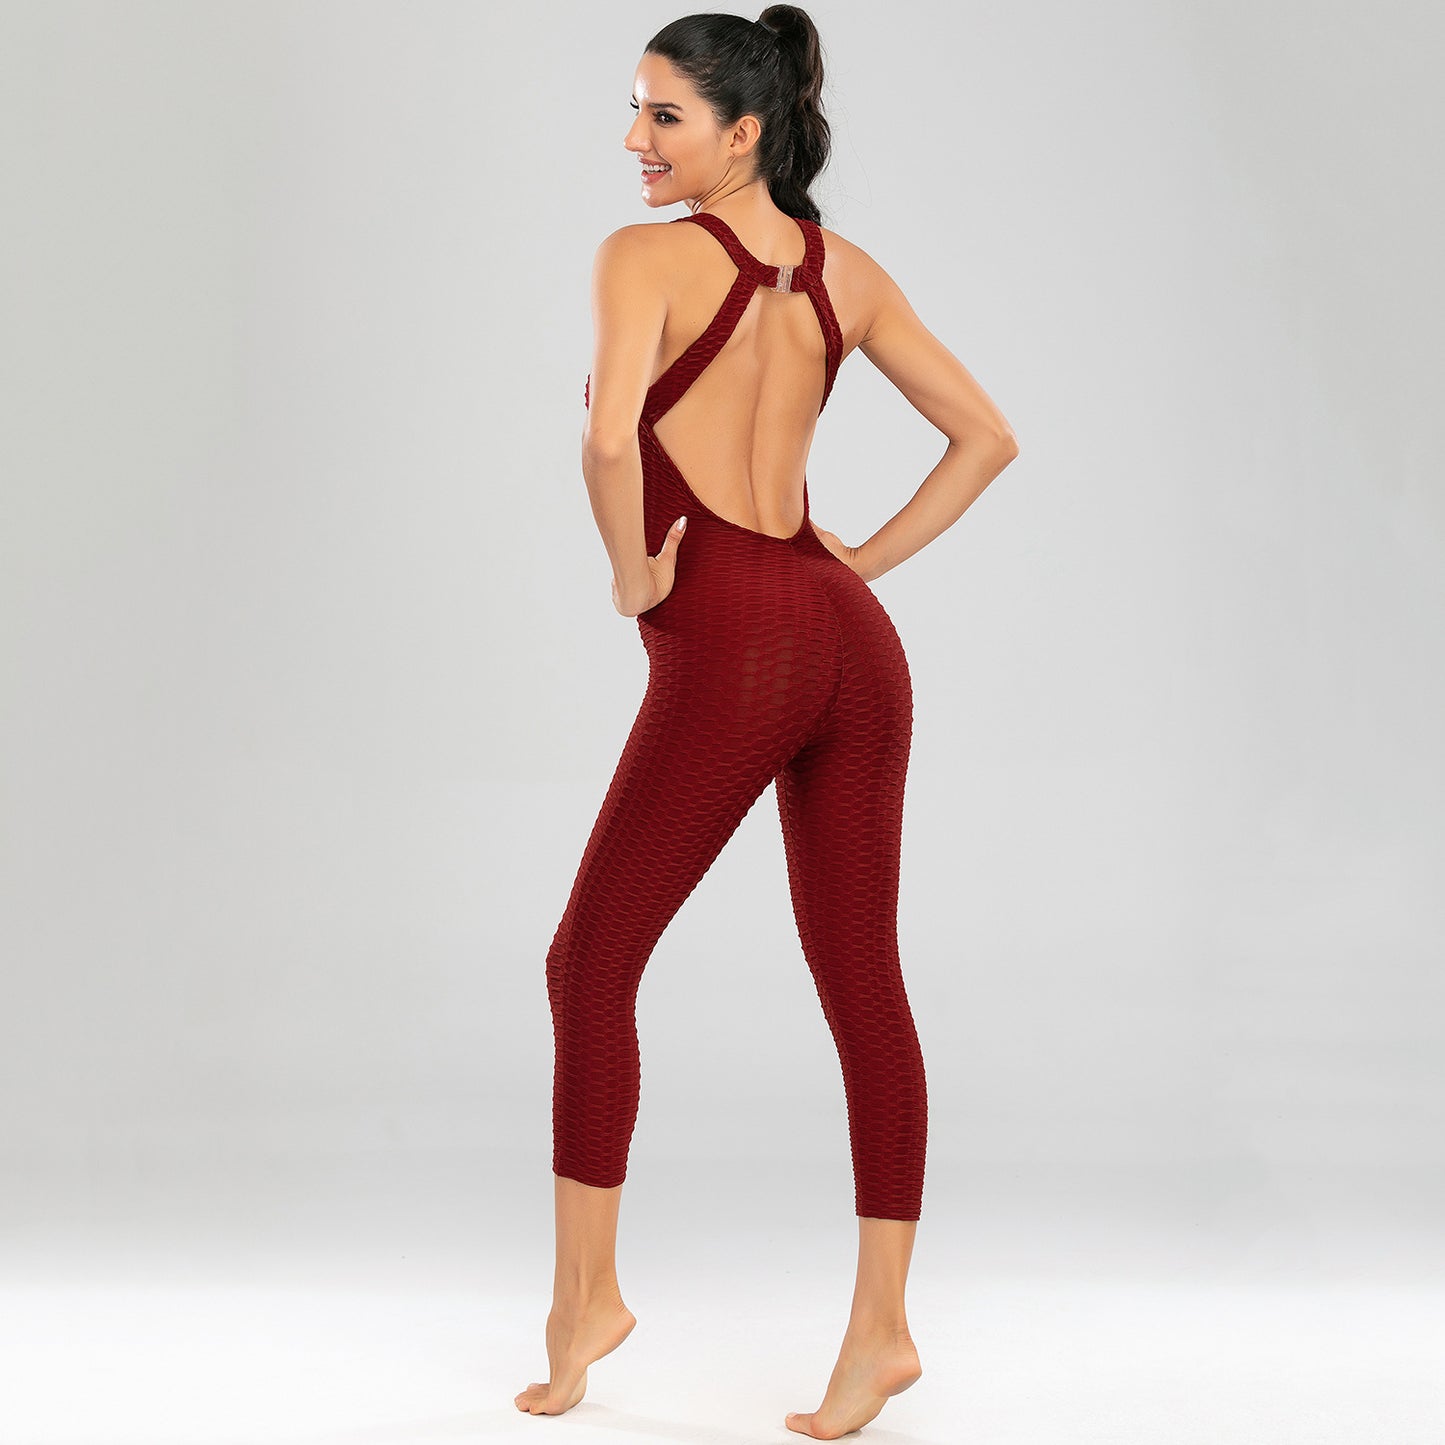 Sexy Elastic Exercising Yoga Jumpsuits for Women